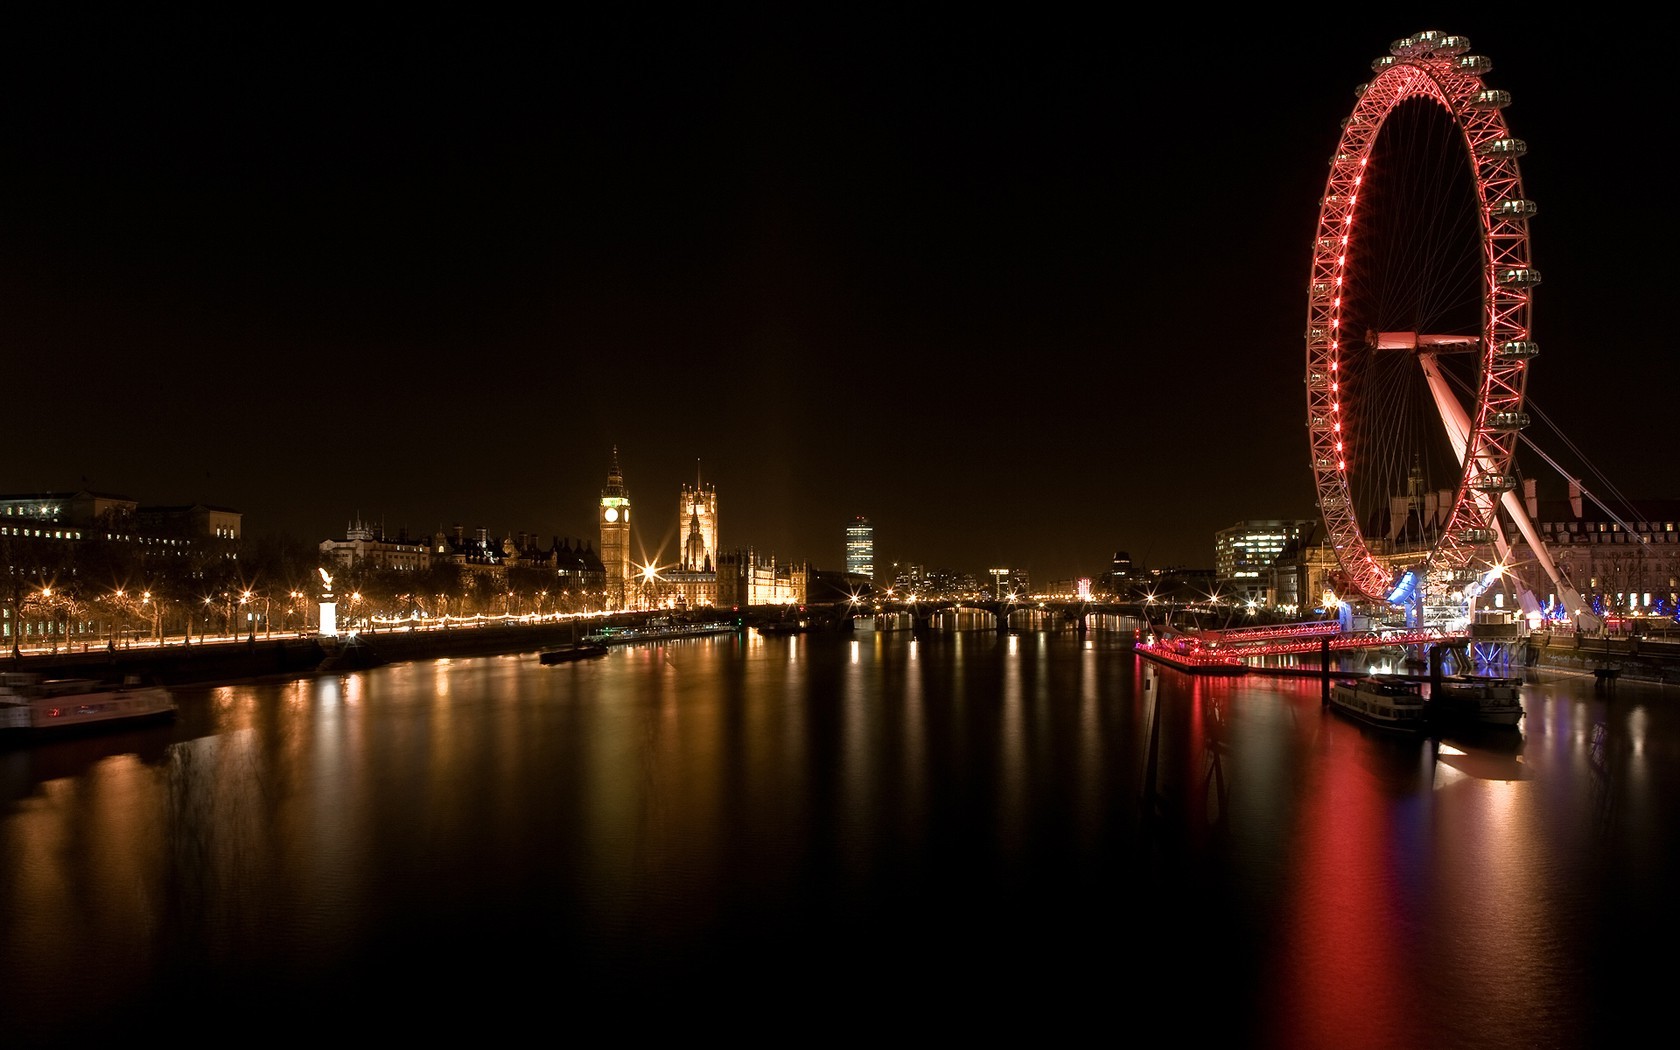 Wallpaper : Trey Ratcliff, photography, 4k, UK, England, cityscape, night,  lights, building, water, boat, London Eye, River Thames 3840x2160 -  MikeAlew - 2197895 - HD Wallpapers - WallHere